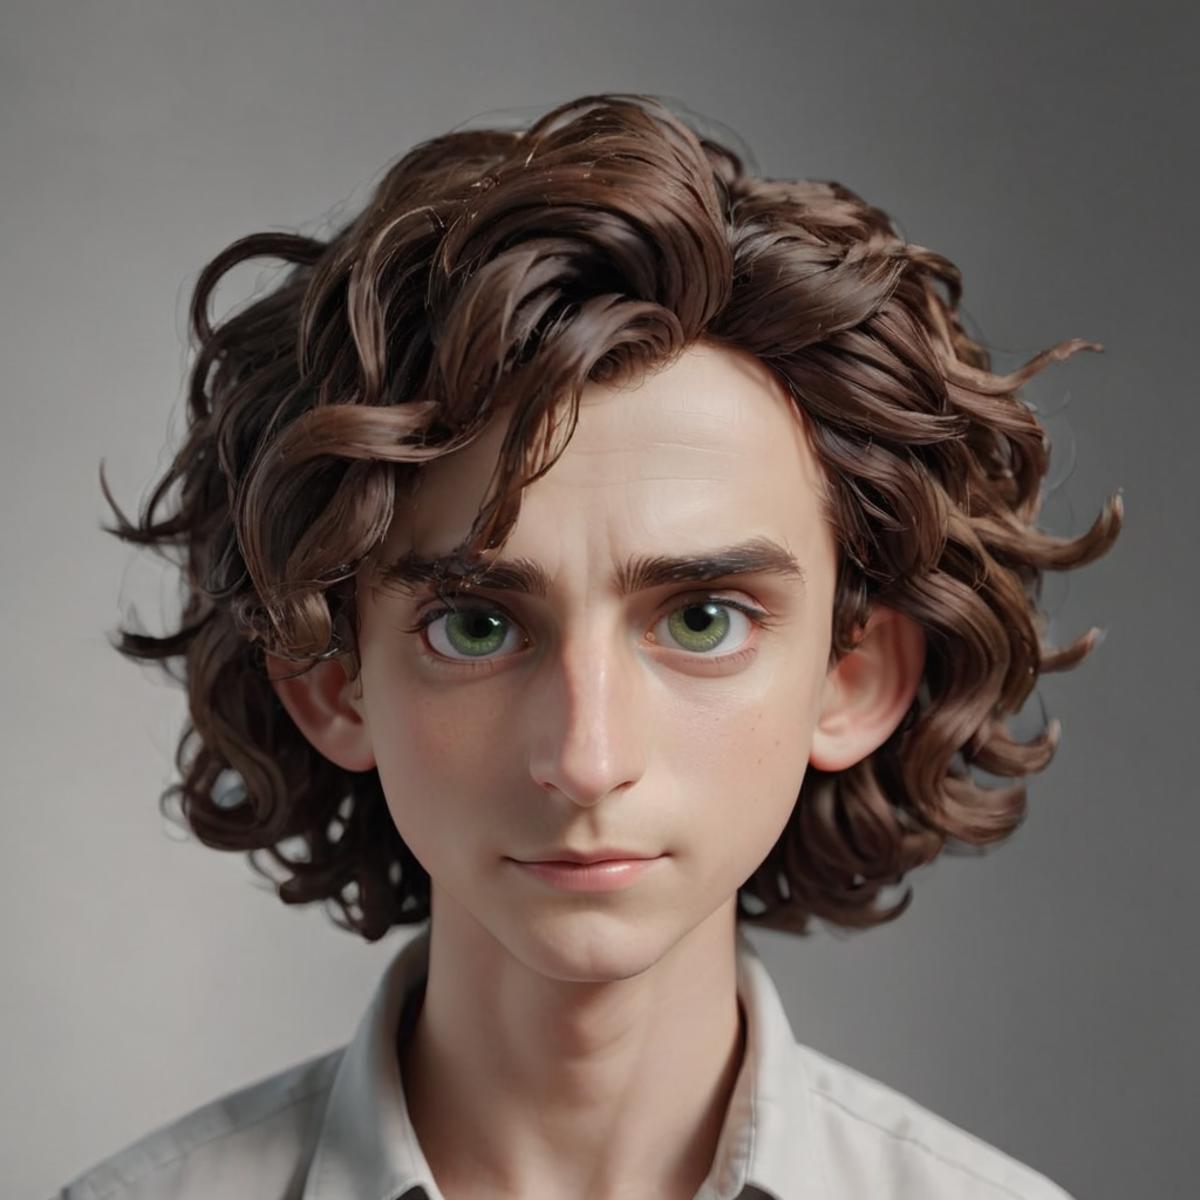 A computer-generated image of a male with curly hair and green eyes.